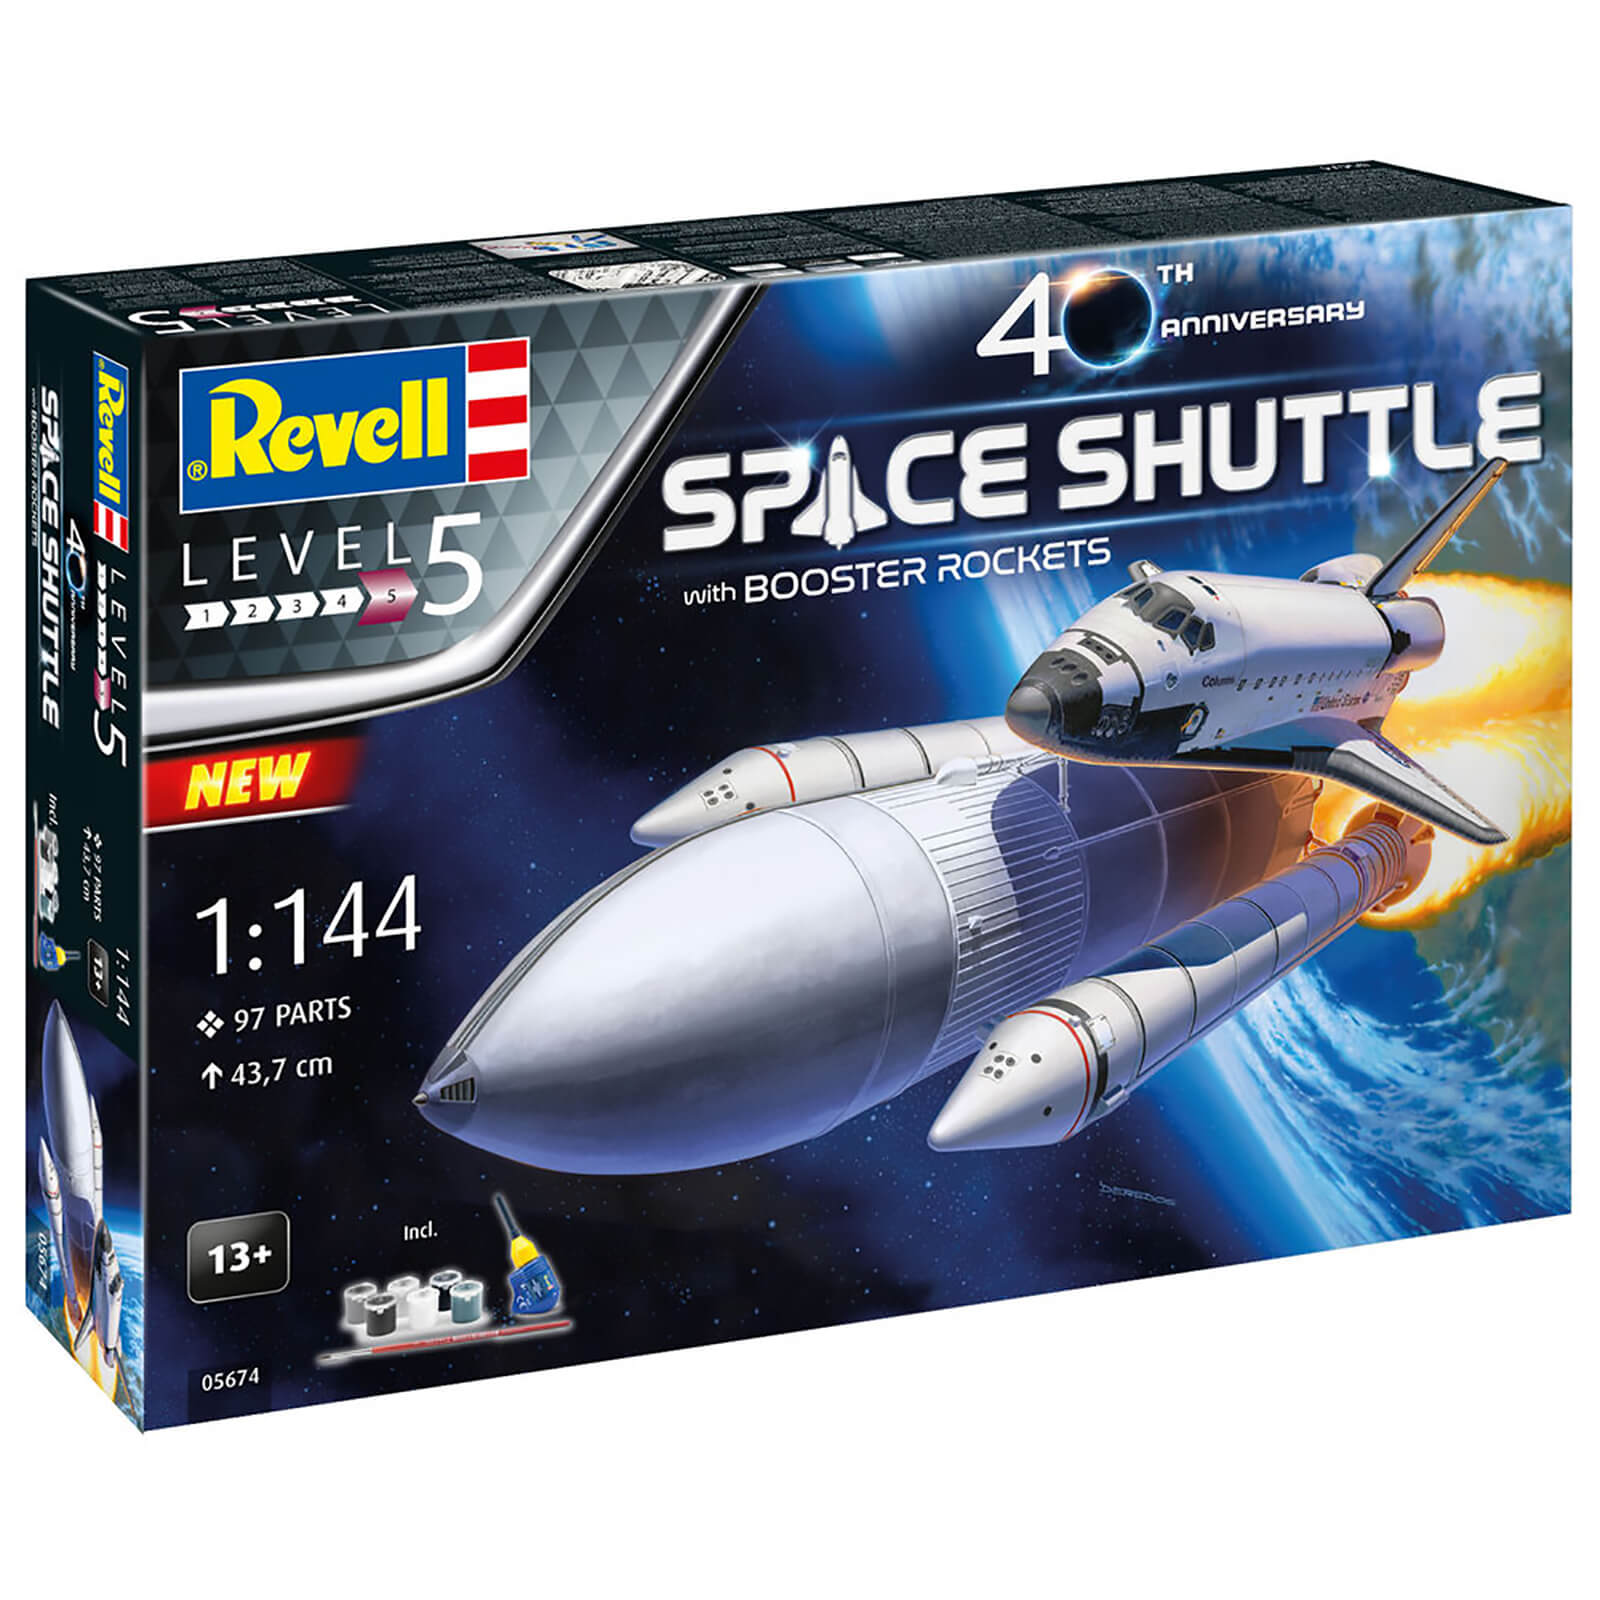 Gift Set Space Shuttle & Boosters 40th Anniversary - 1:144 Scale